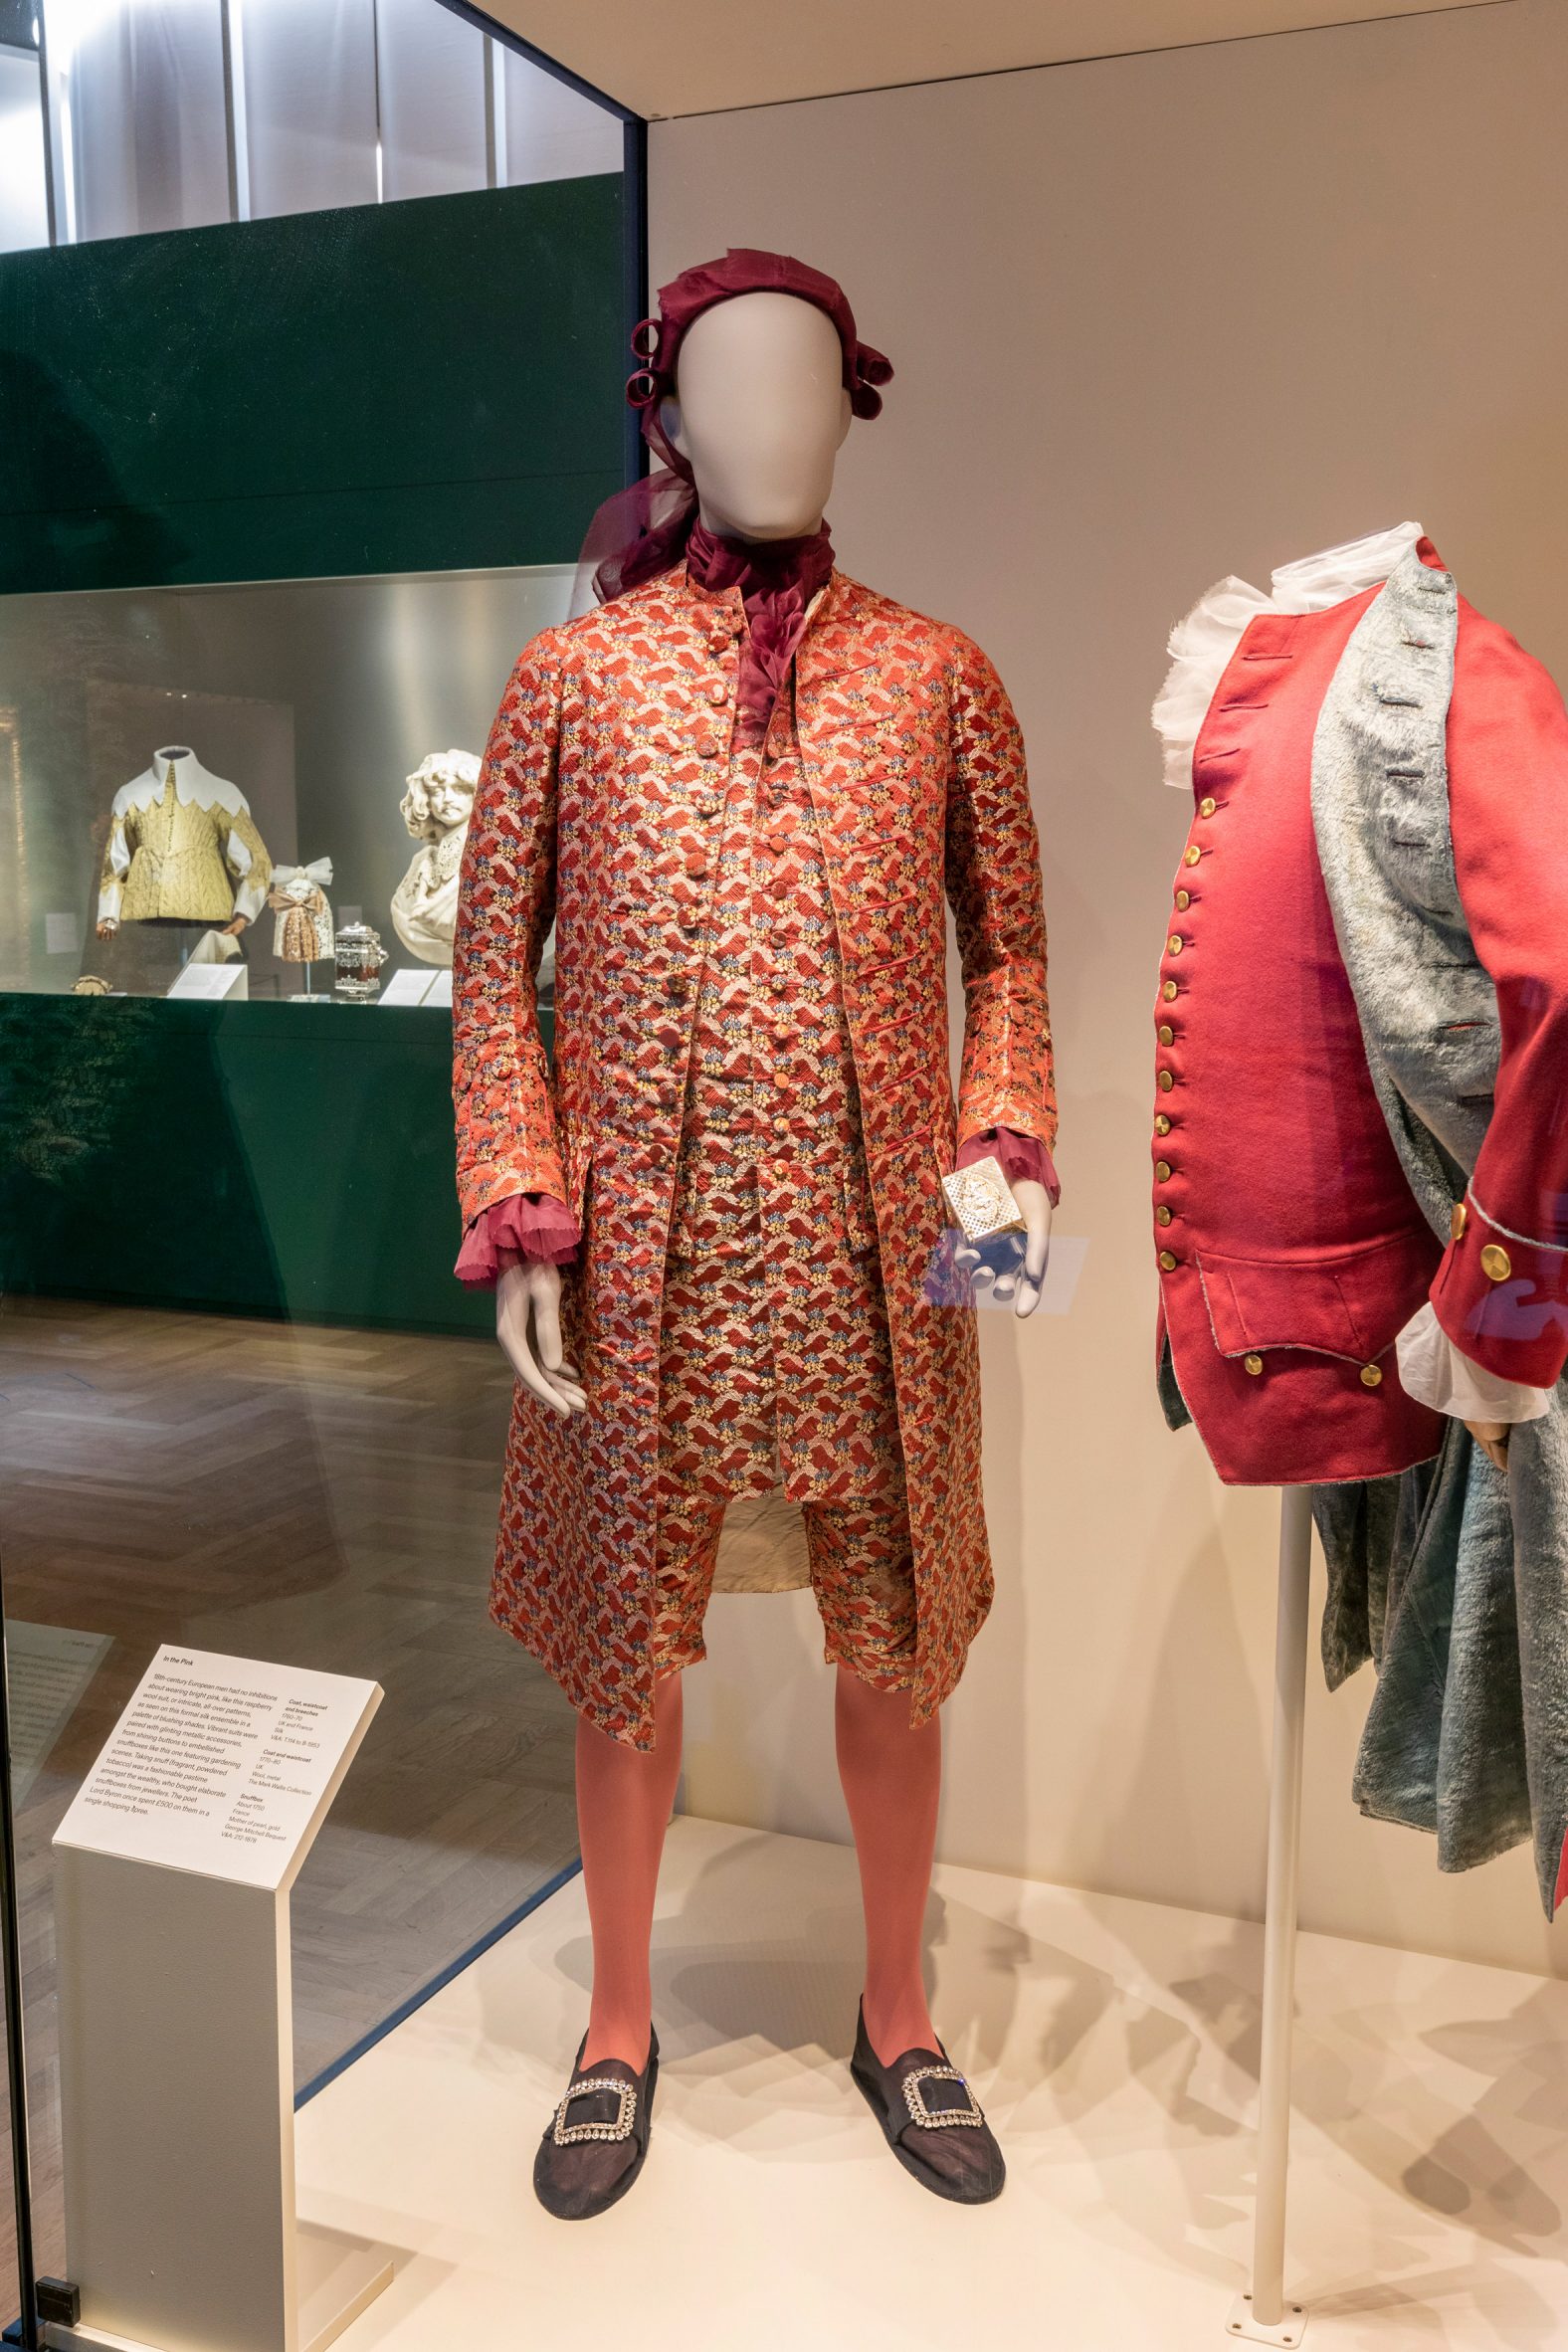 Inside the V&A's Fashioning Masculinities exhibition